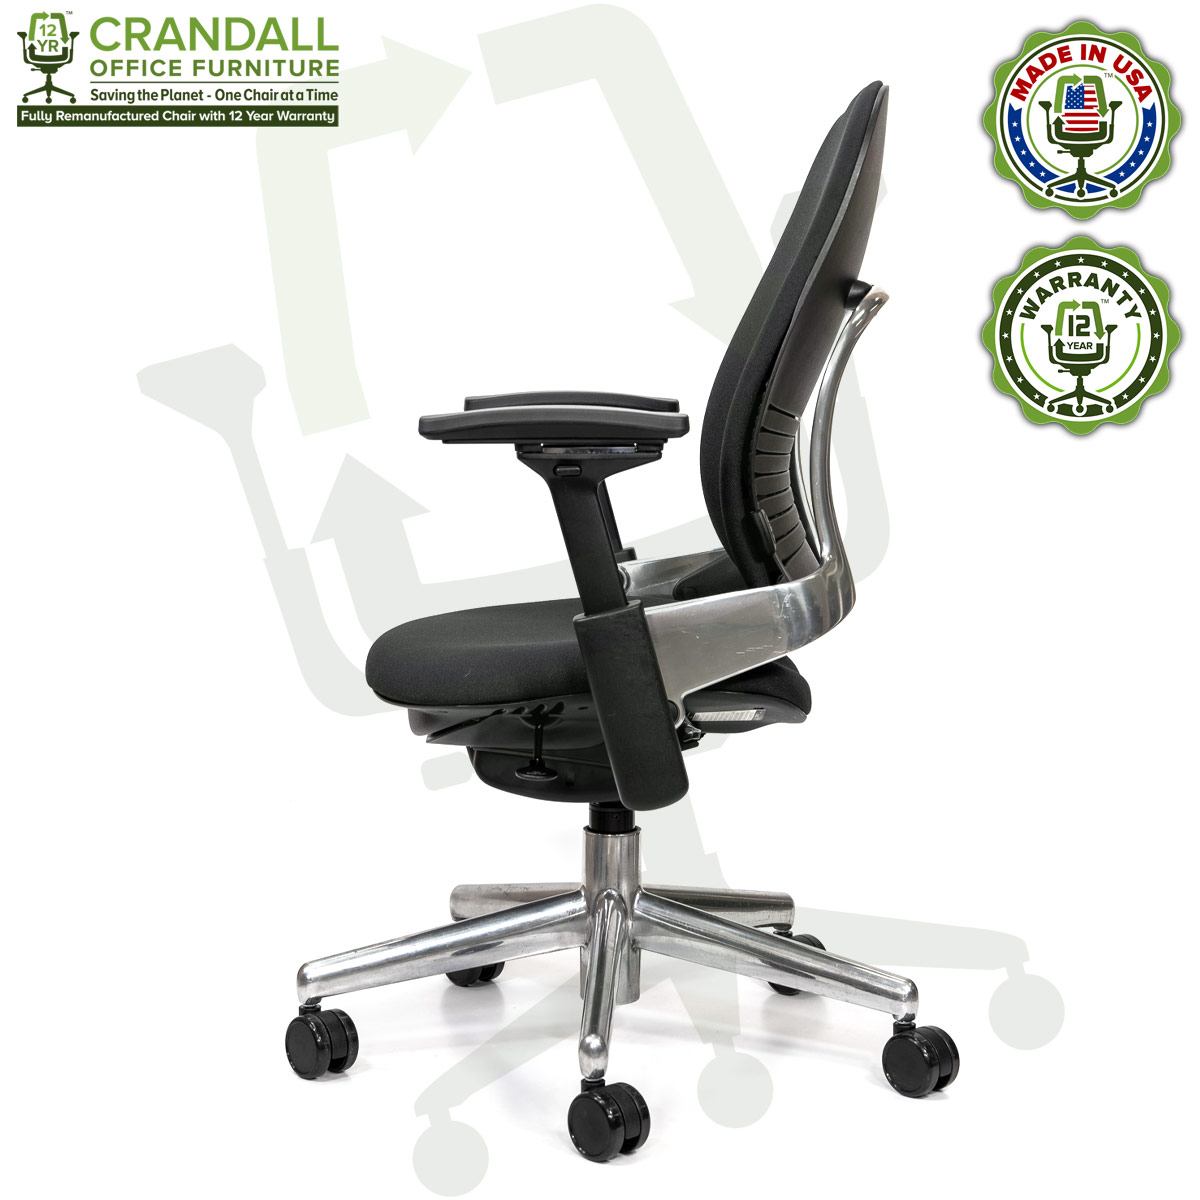 Crandall Office Furniture Remanufactured Steelcase V2 Leap Chair - Polished Aluminum Frame 03